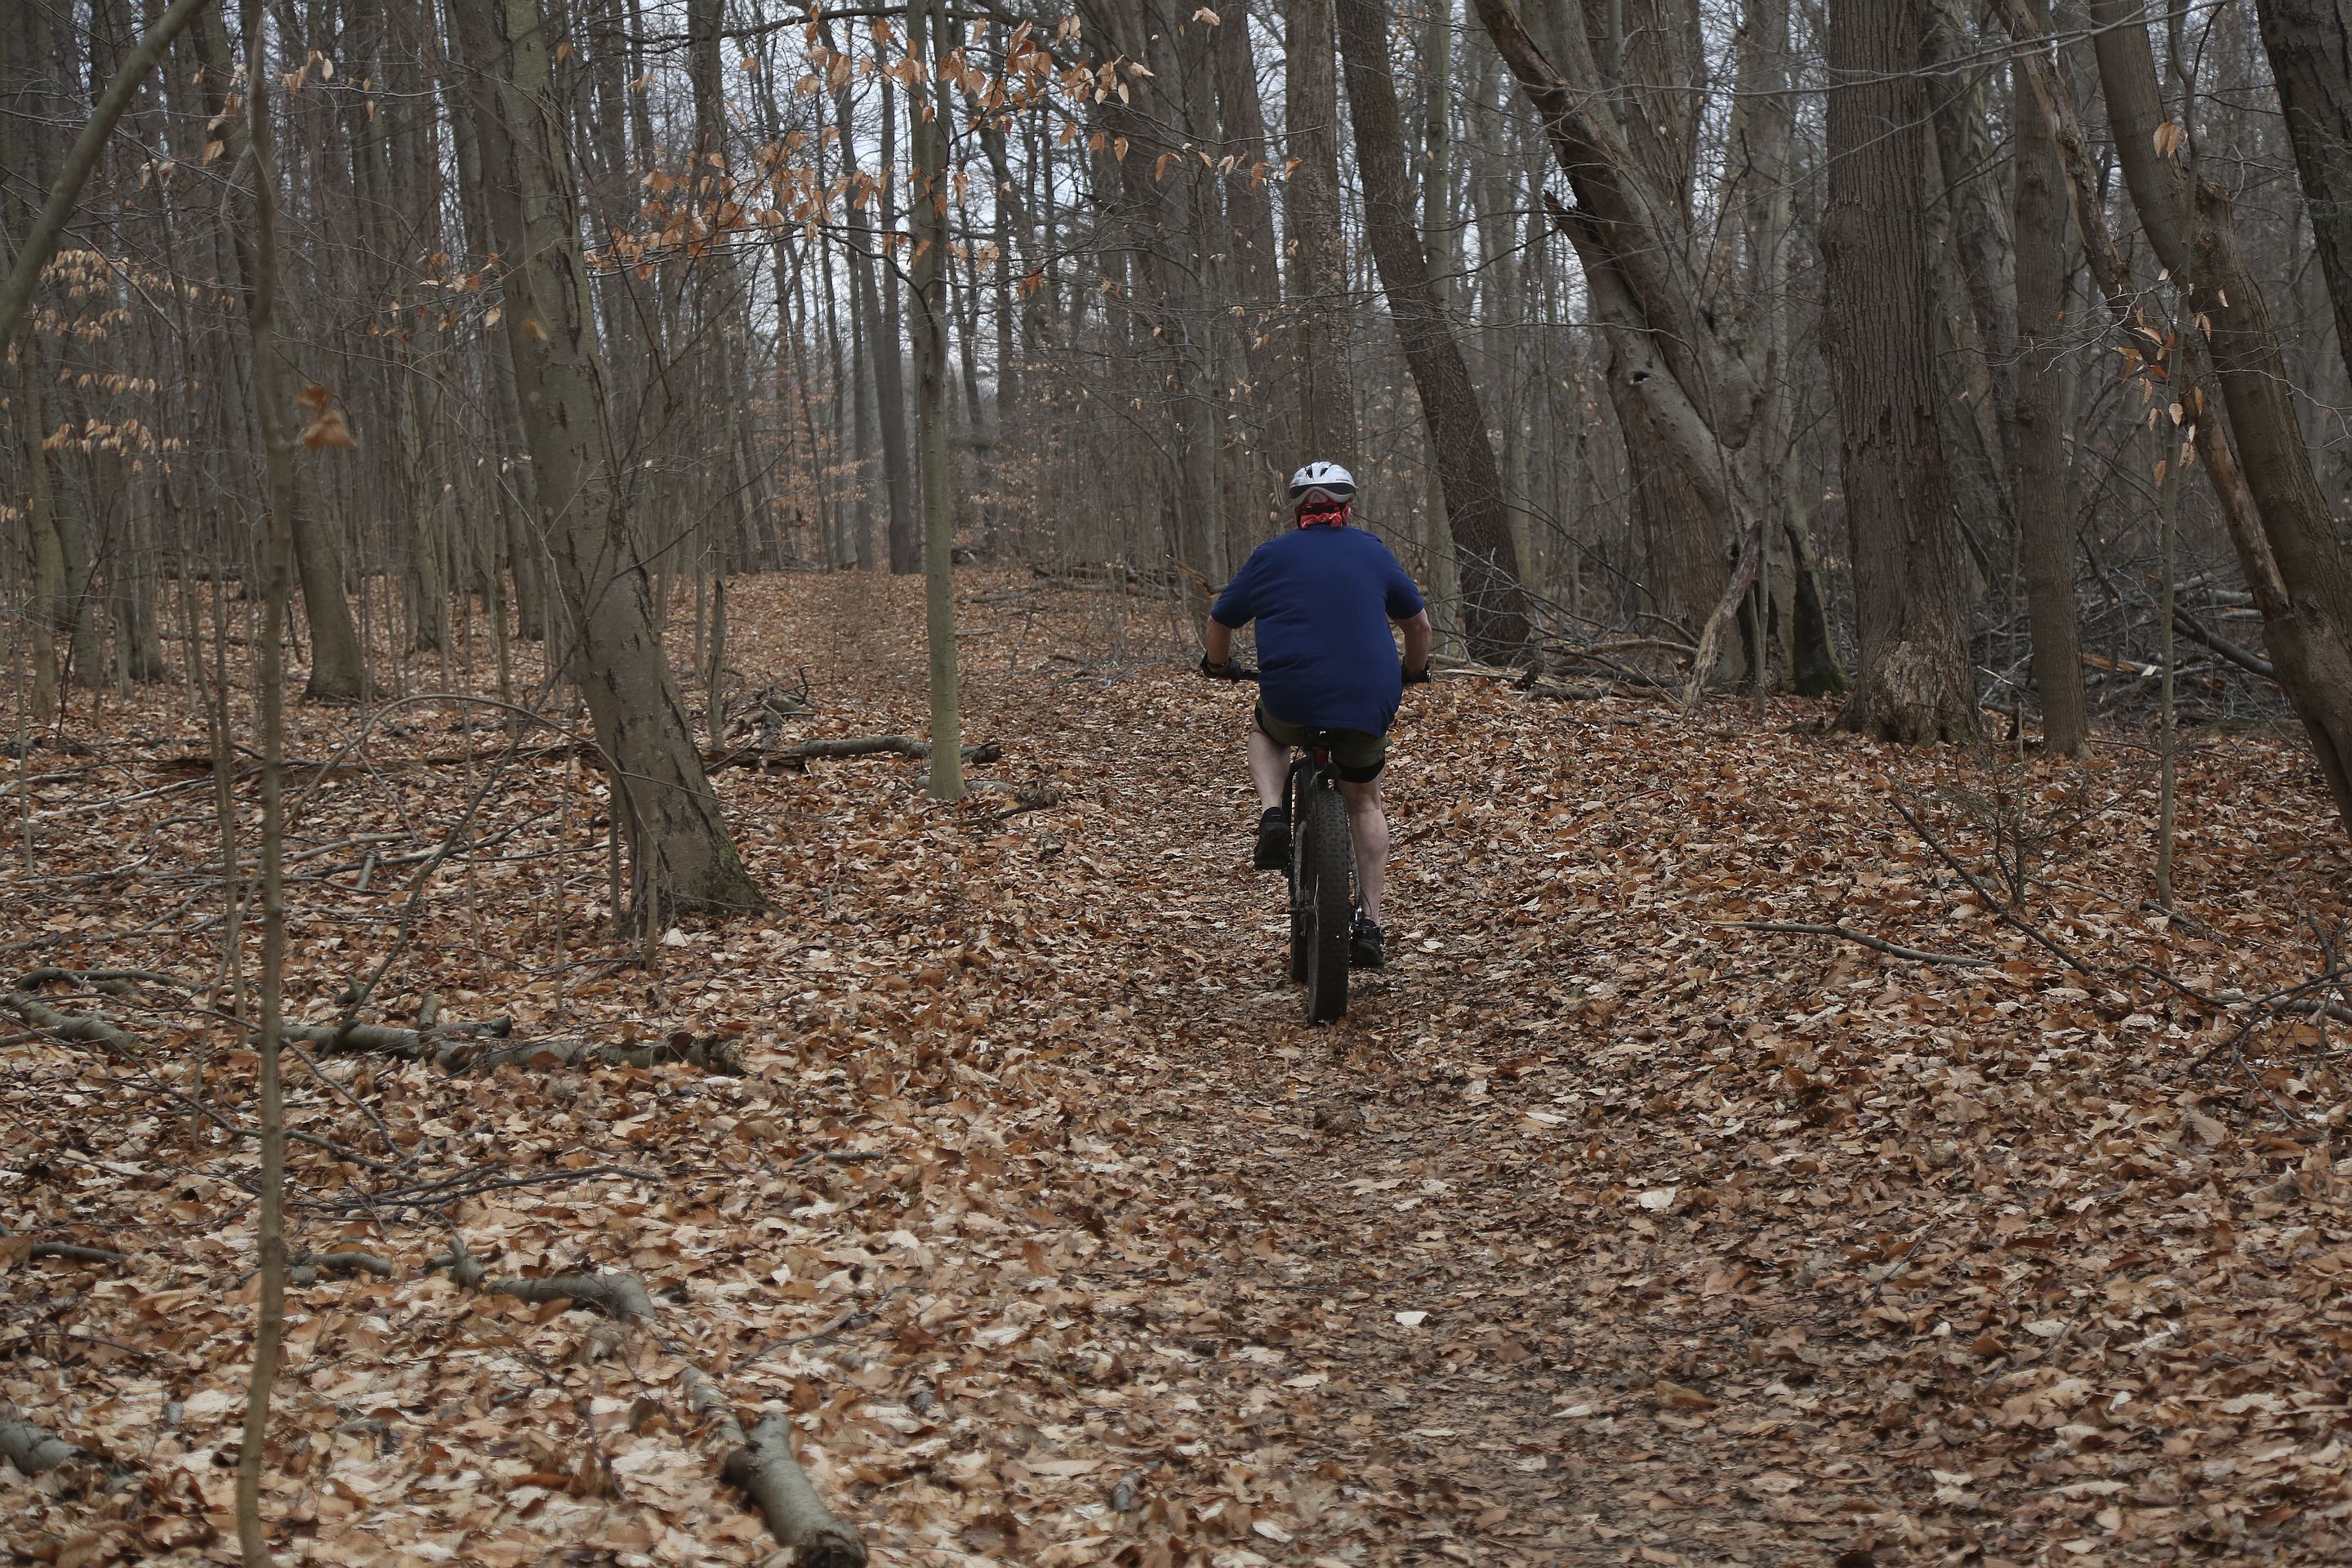 A person in a blue shirt riding a mountain bike along the leaf covered Midnight Trail. It is an overcast winter day, but no snow is on the ground.